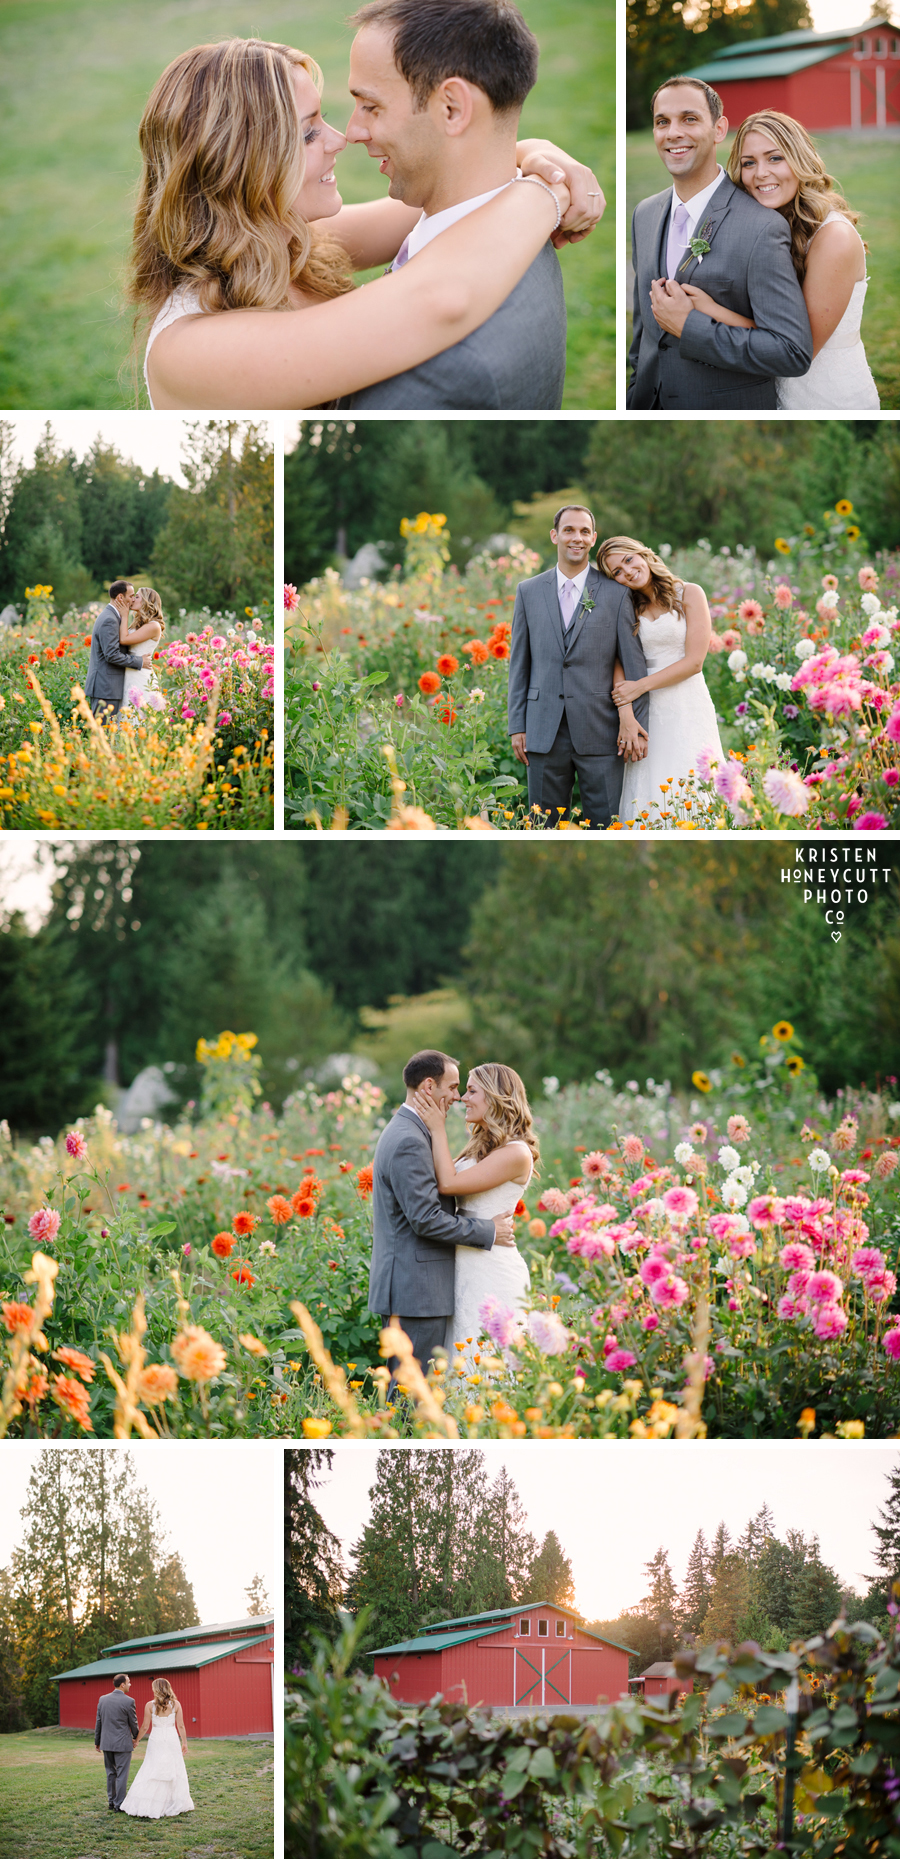 Bride and groom walk among the flowers during sunset at their farm kitchen wedding